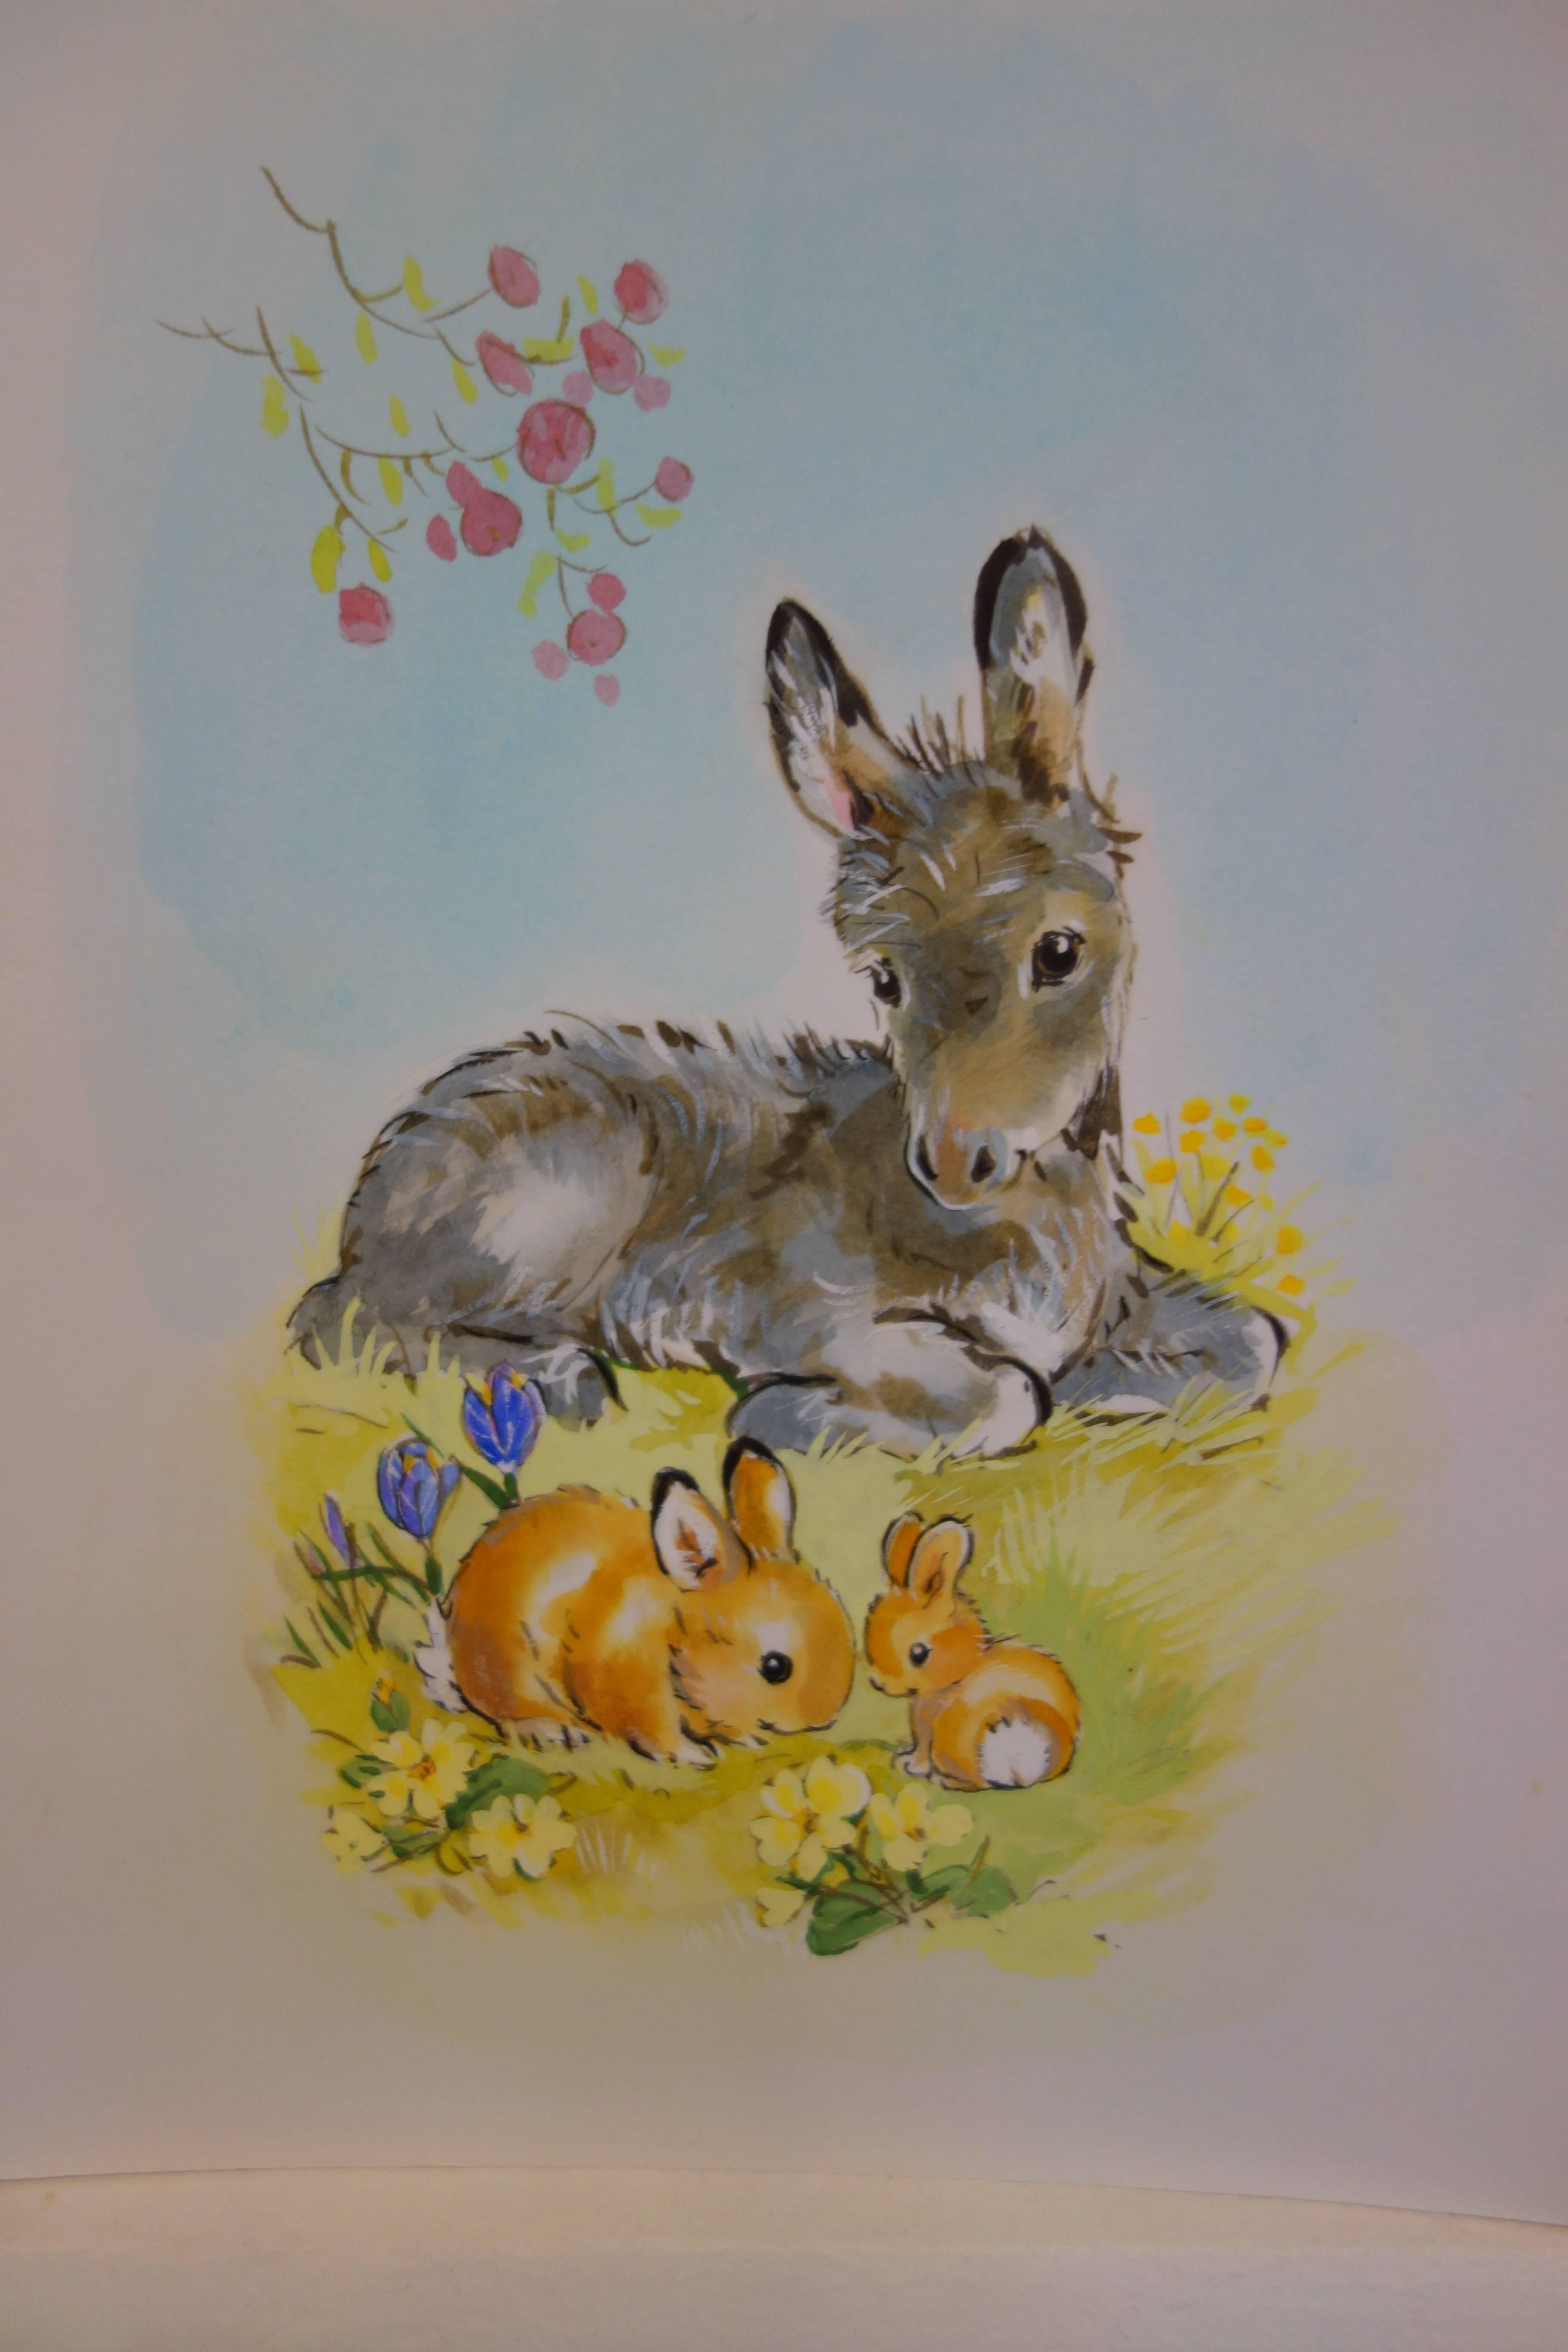 Diana Matthes Animal Art - An English scene of a Donkey and Rabbits in a field, with wild flowers